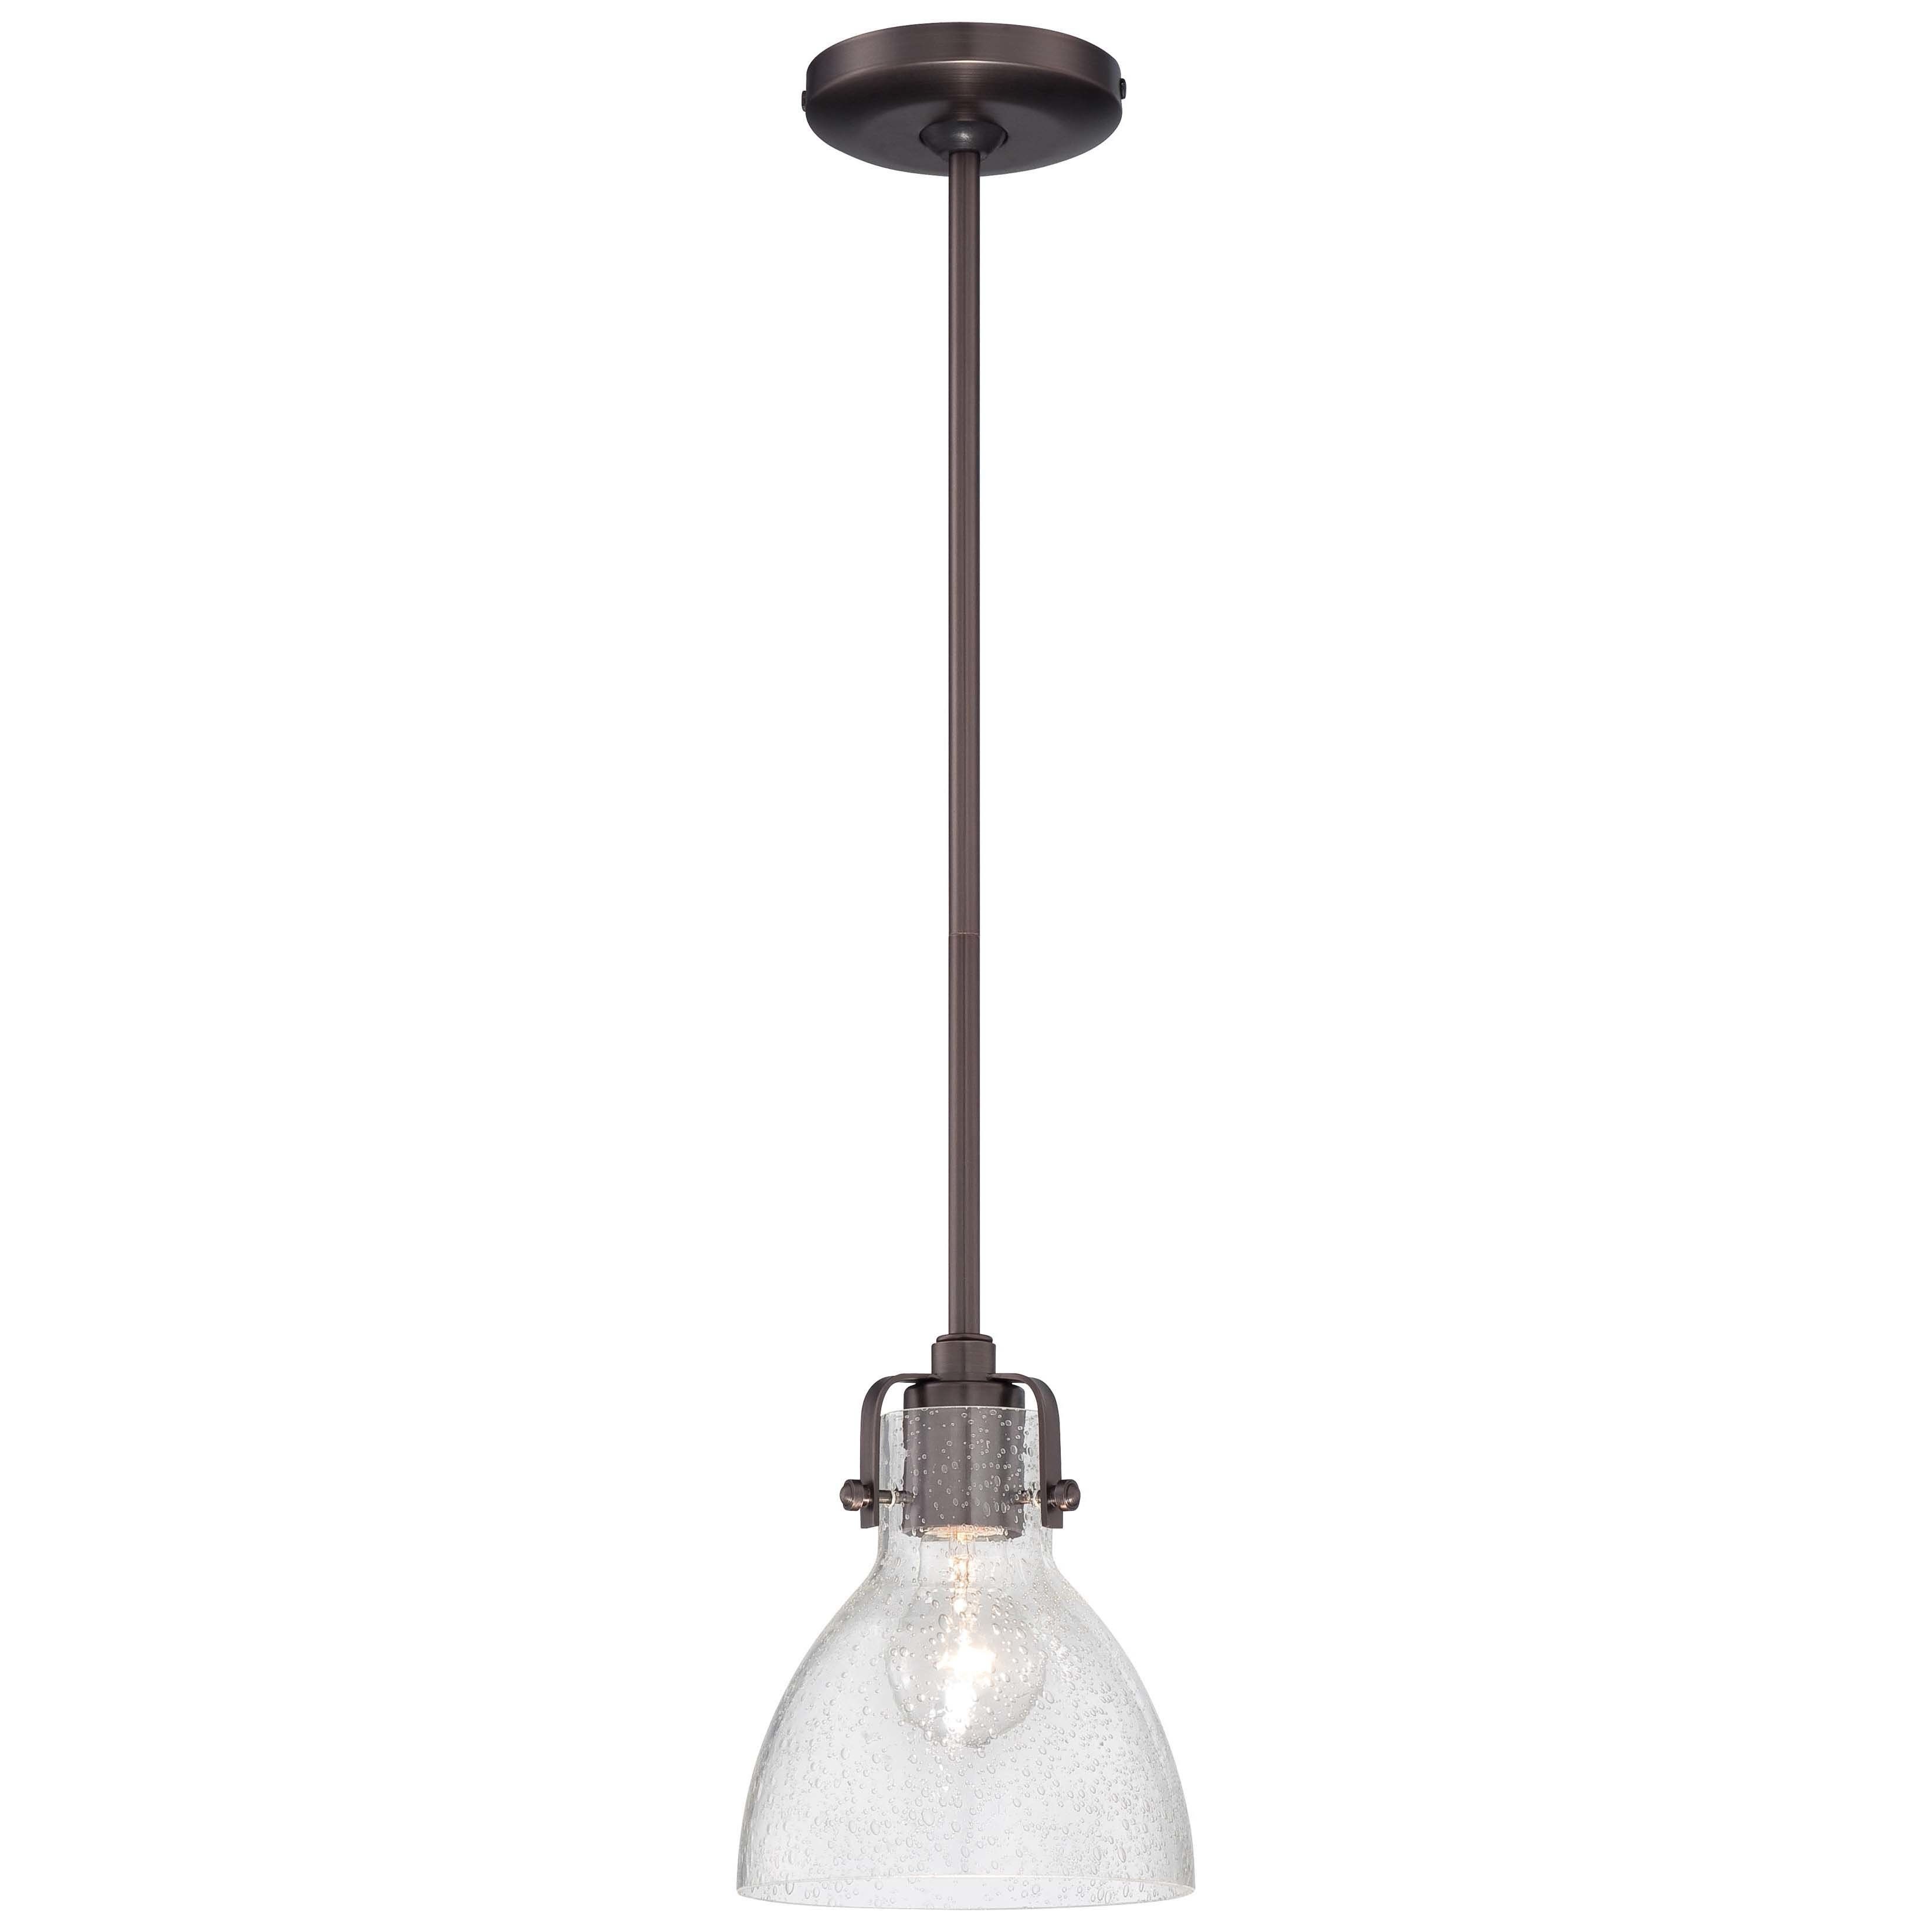 Goldie 1 Light Single Bell Pendant With 1 Light Single Bell Pendants (View 3 of 30)